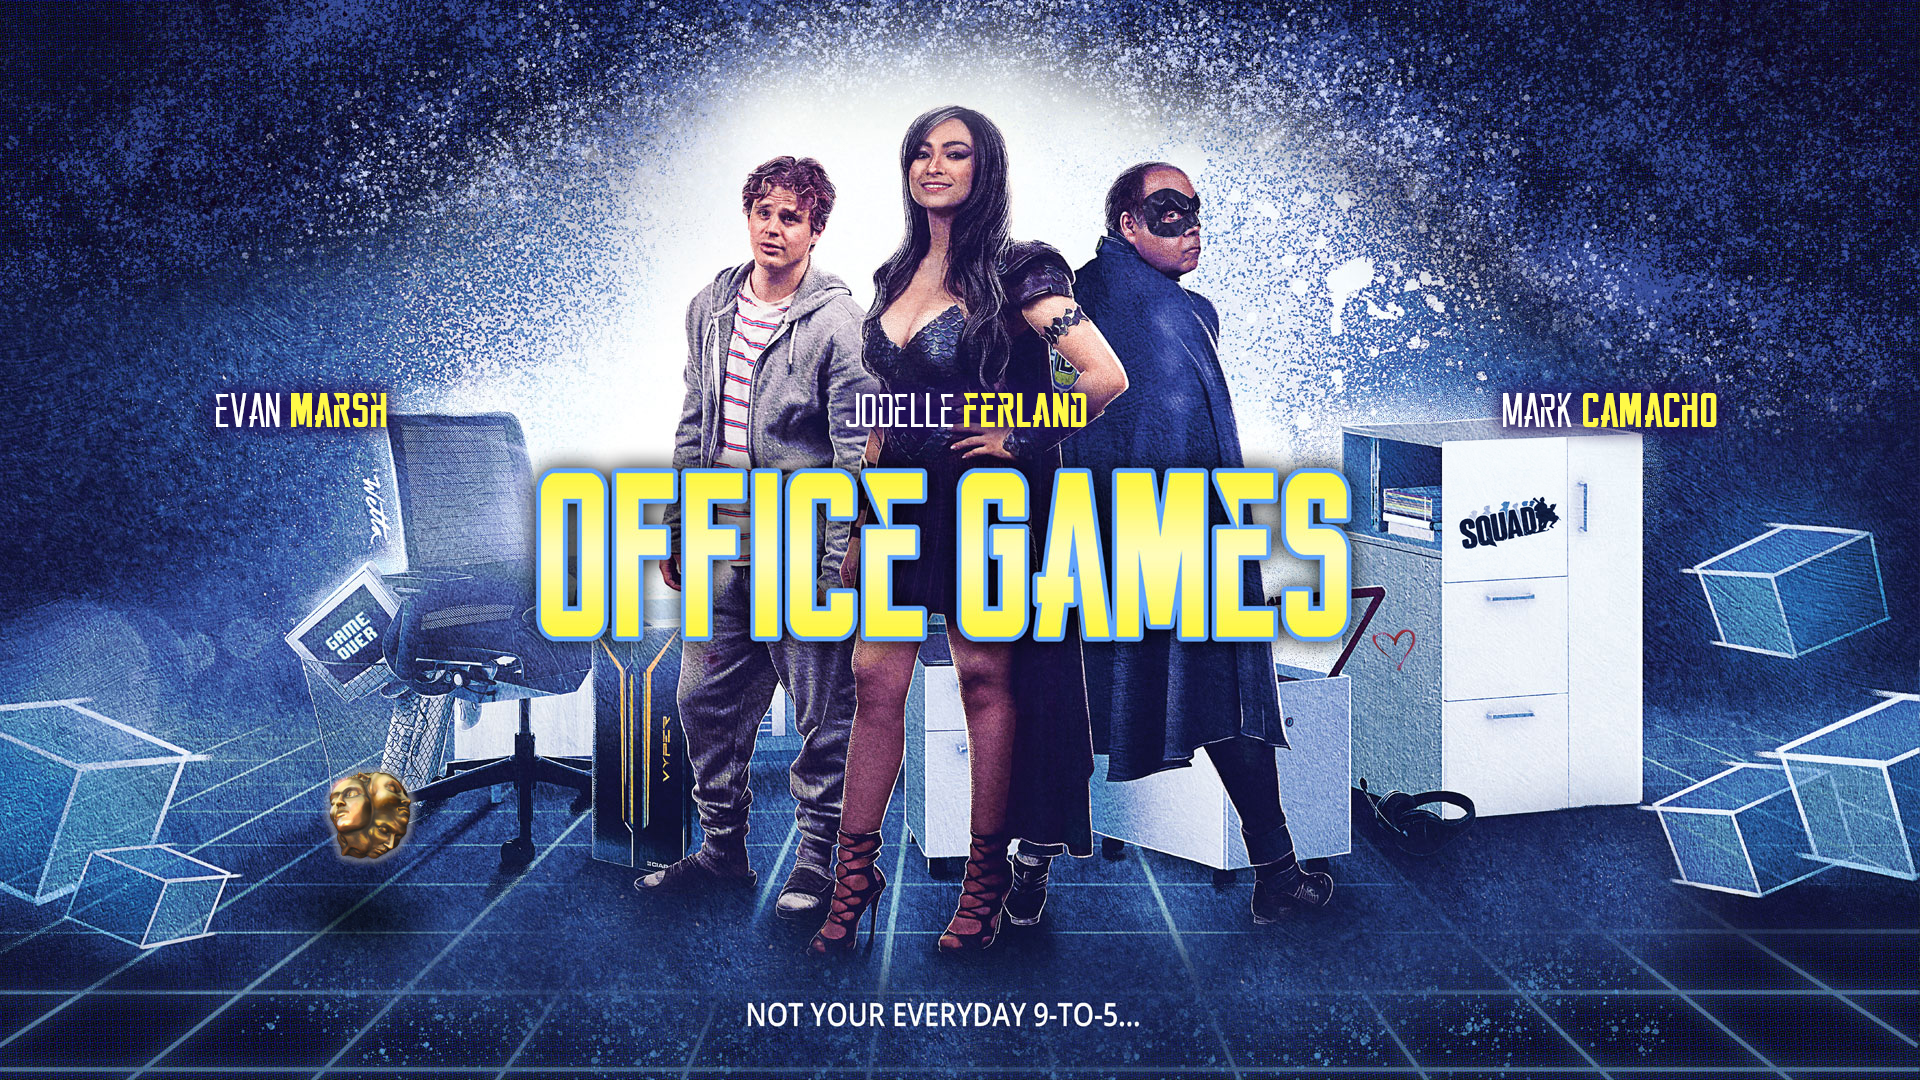 Office Games Comedy Movie - Coming Soon!